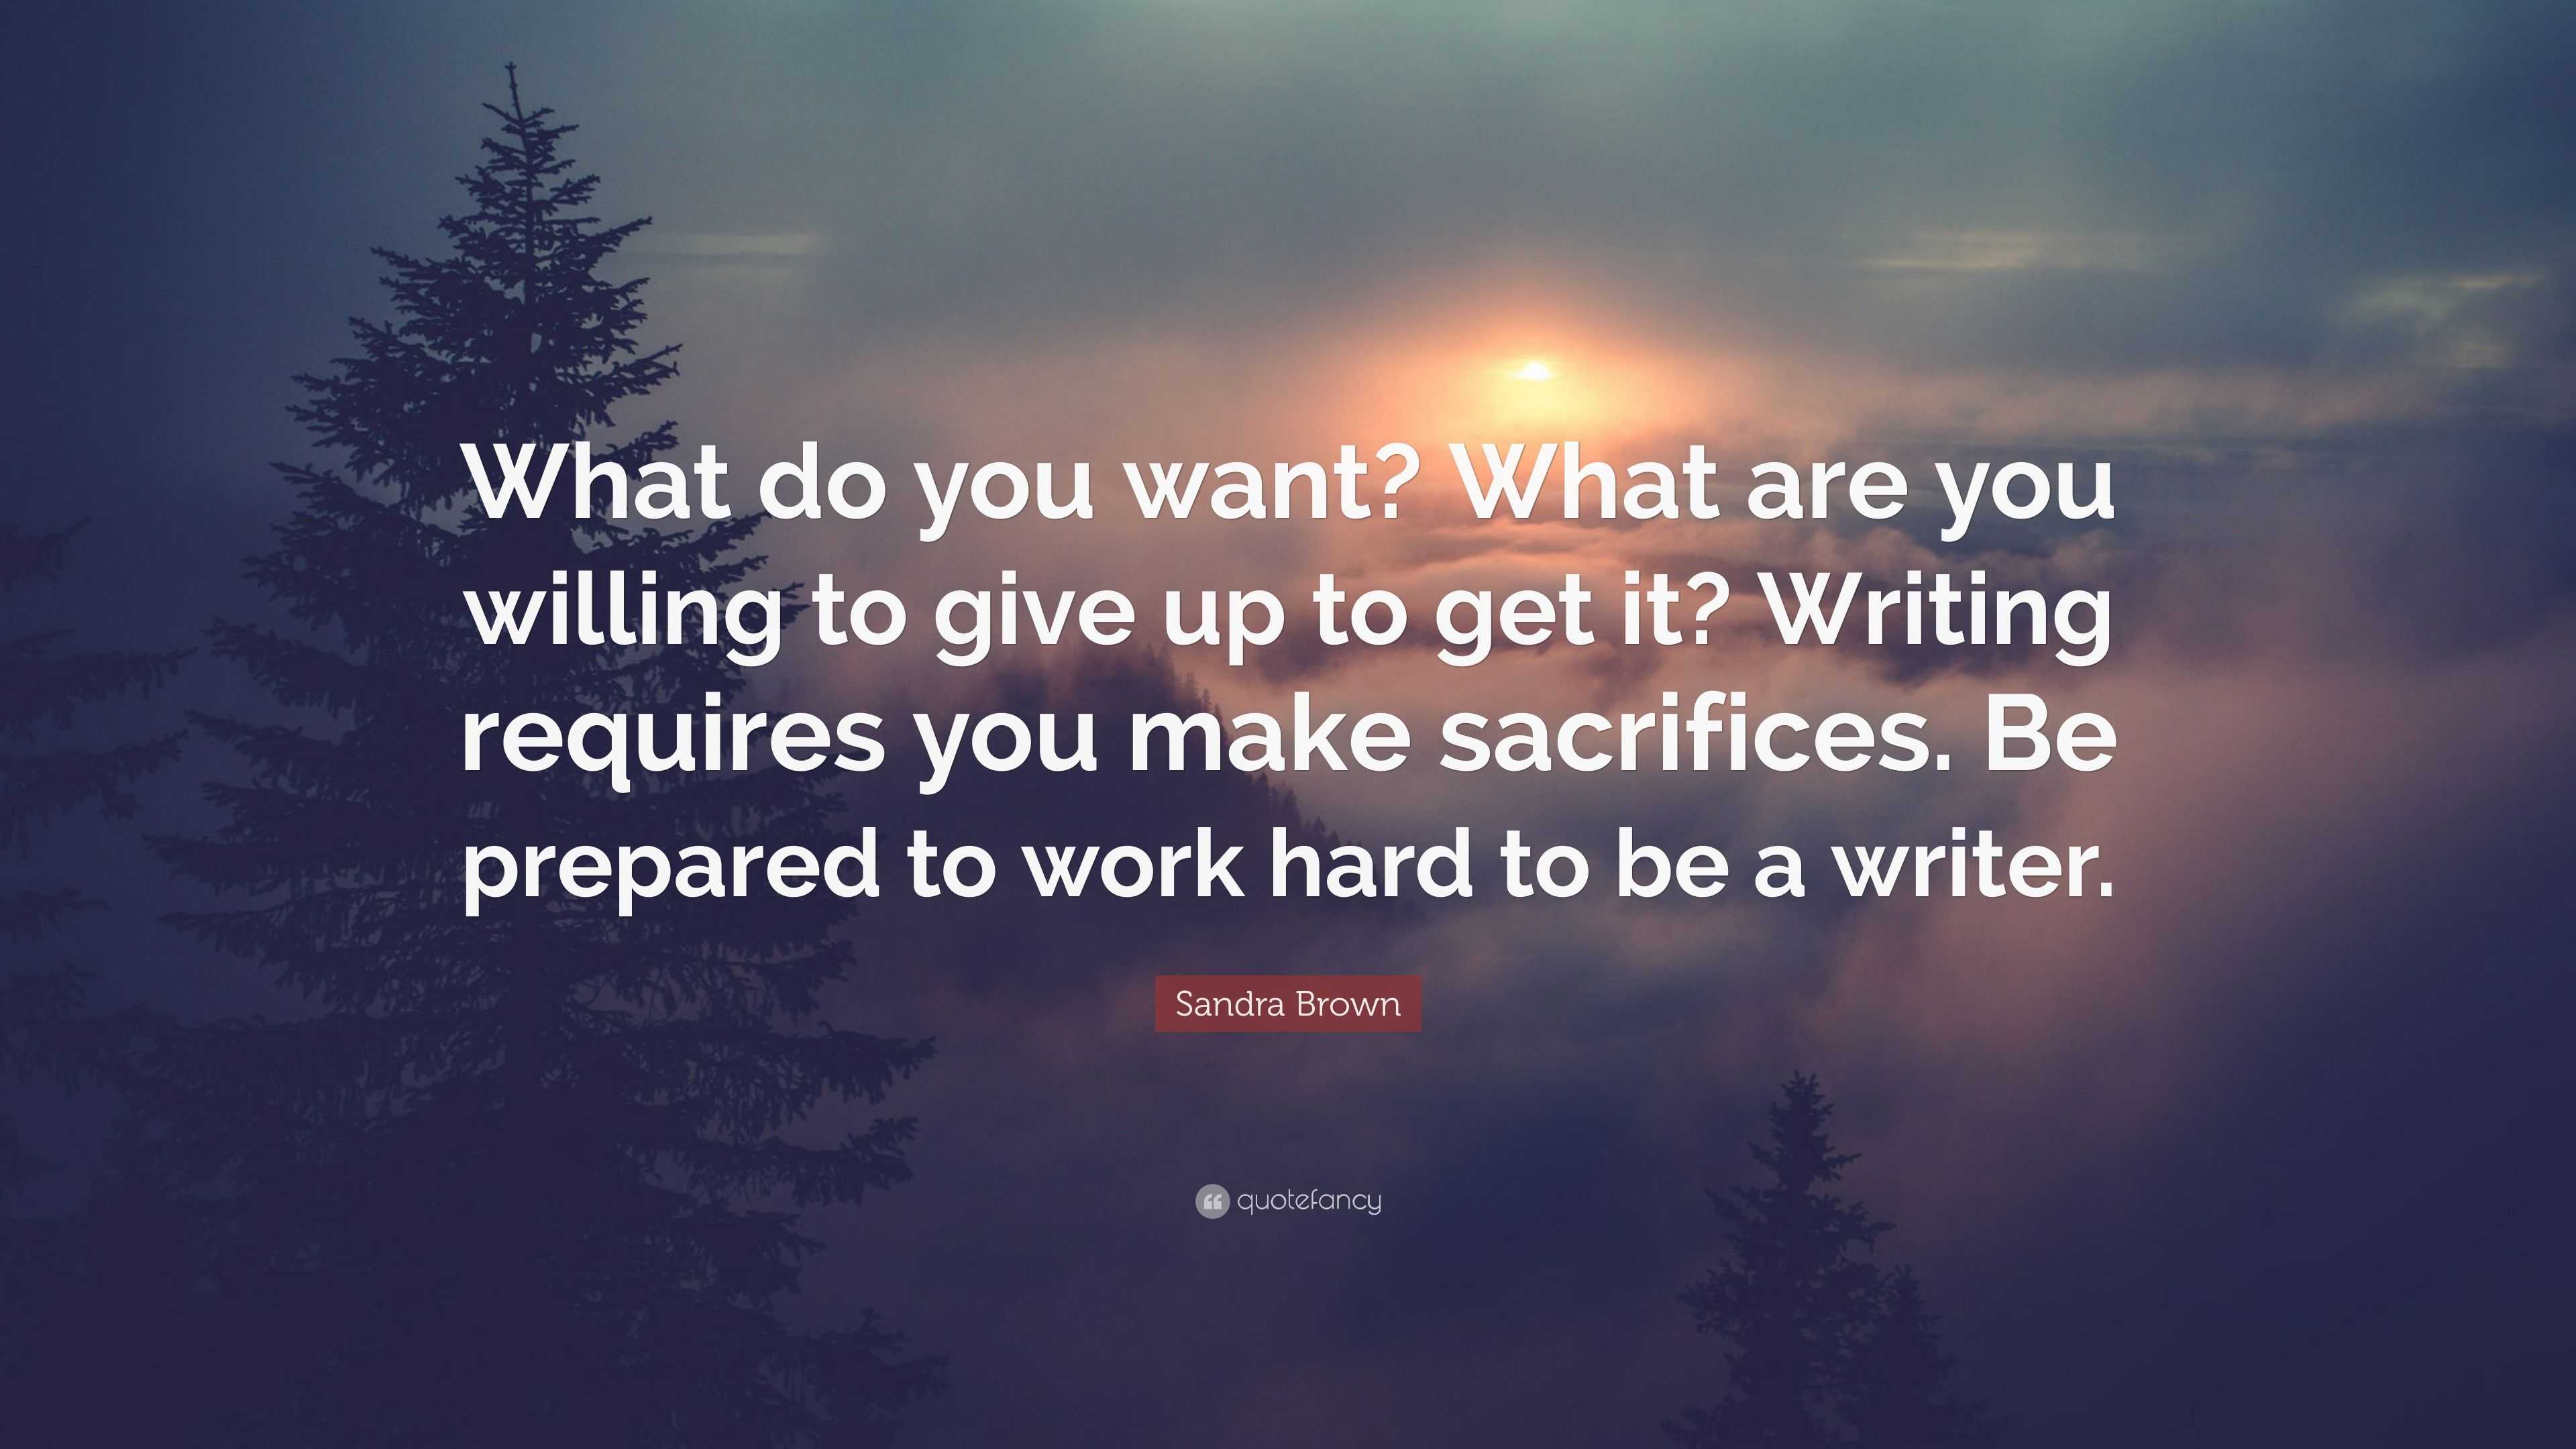 Sandra Brown Quote What Do You Want What Are You Willing To Give Up To Get It Writing Requires You Make Sacrifices Be Prepared To Work H 7 Wallpapers Quotefancy